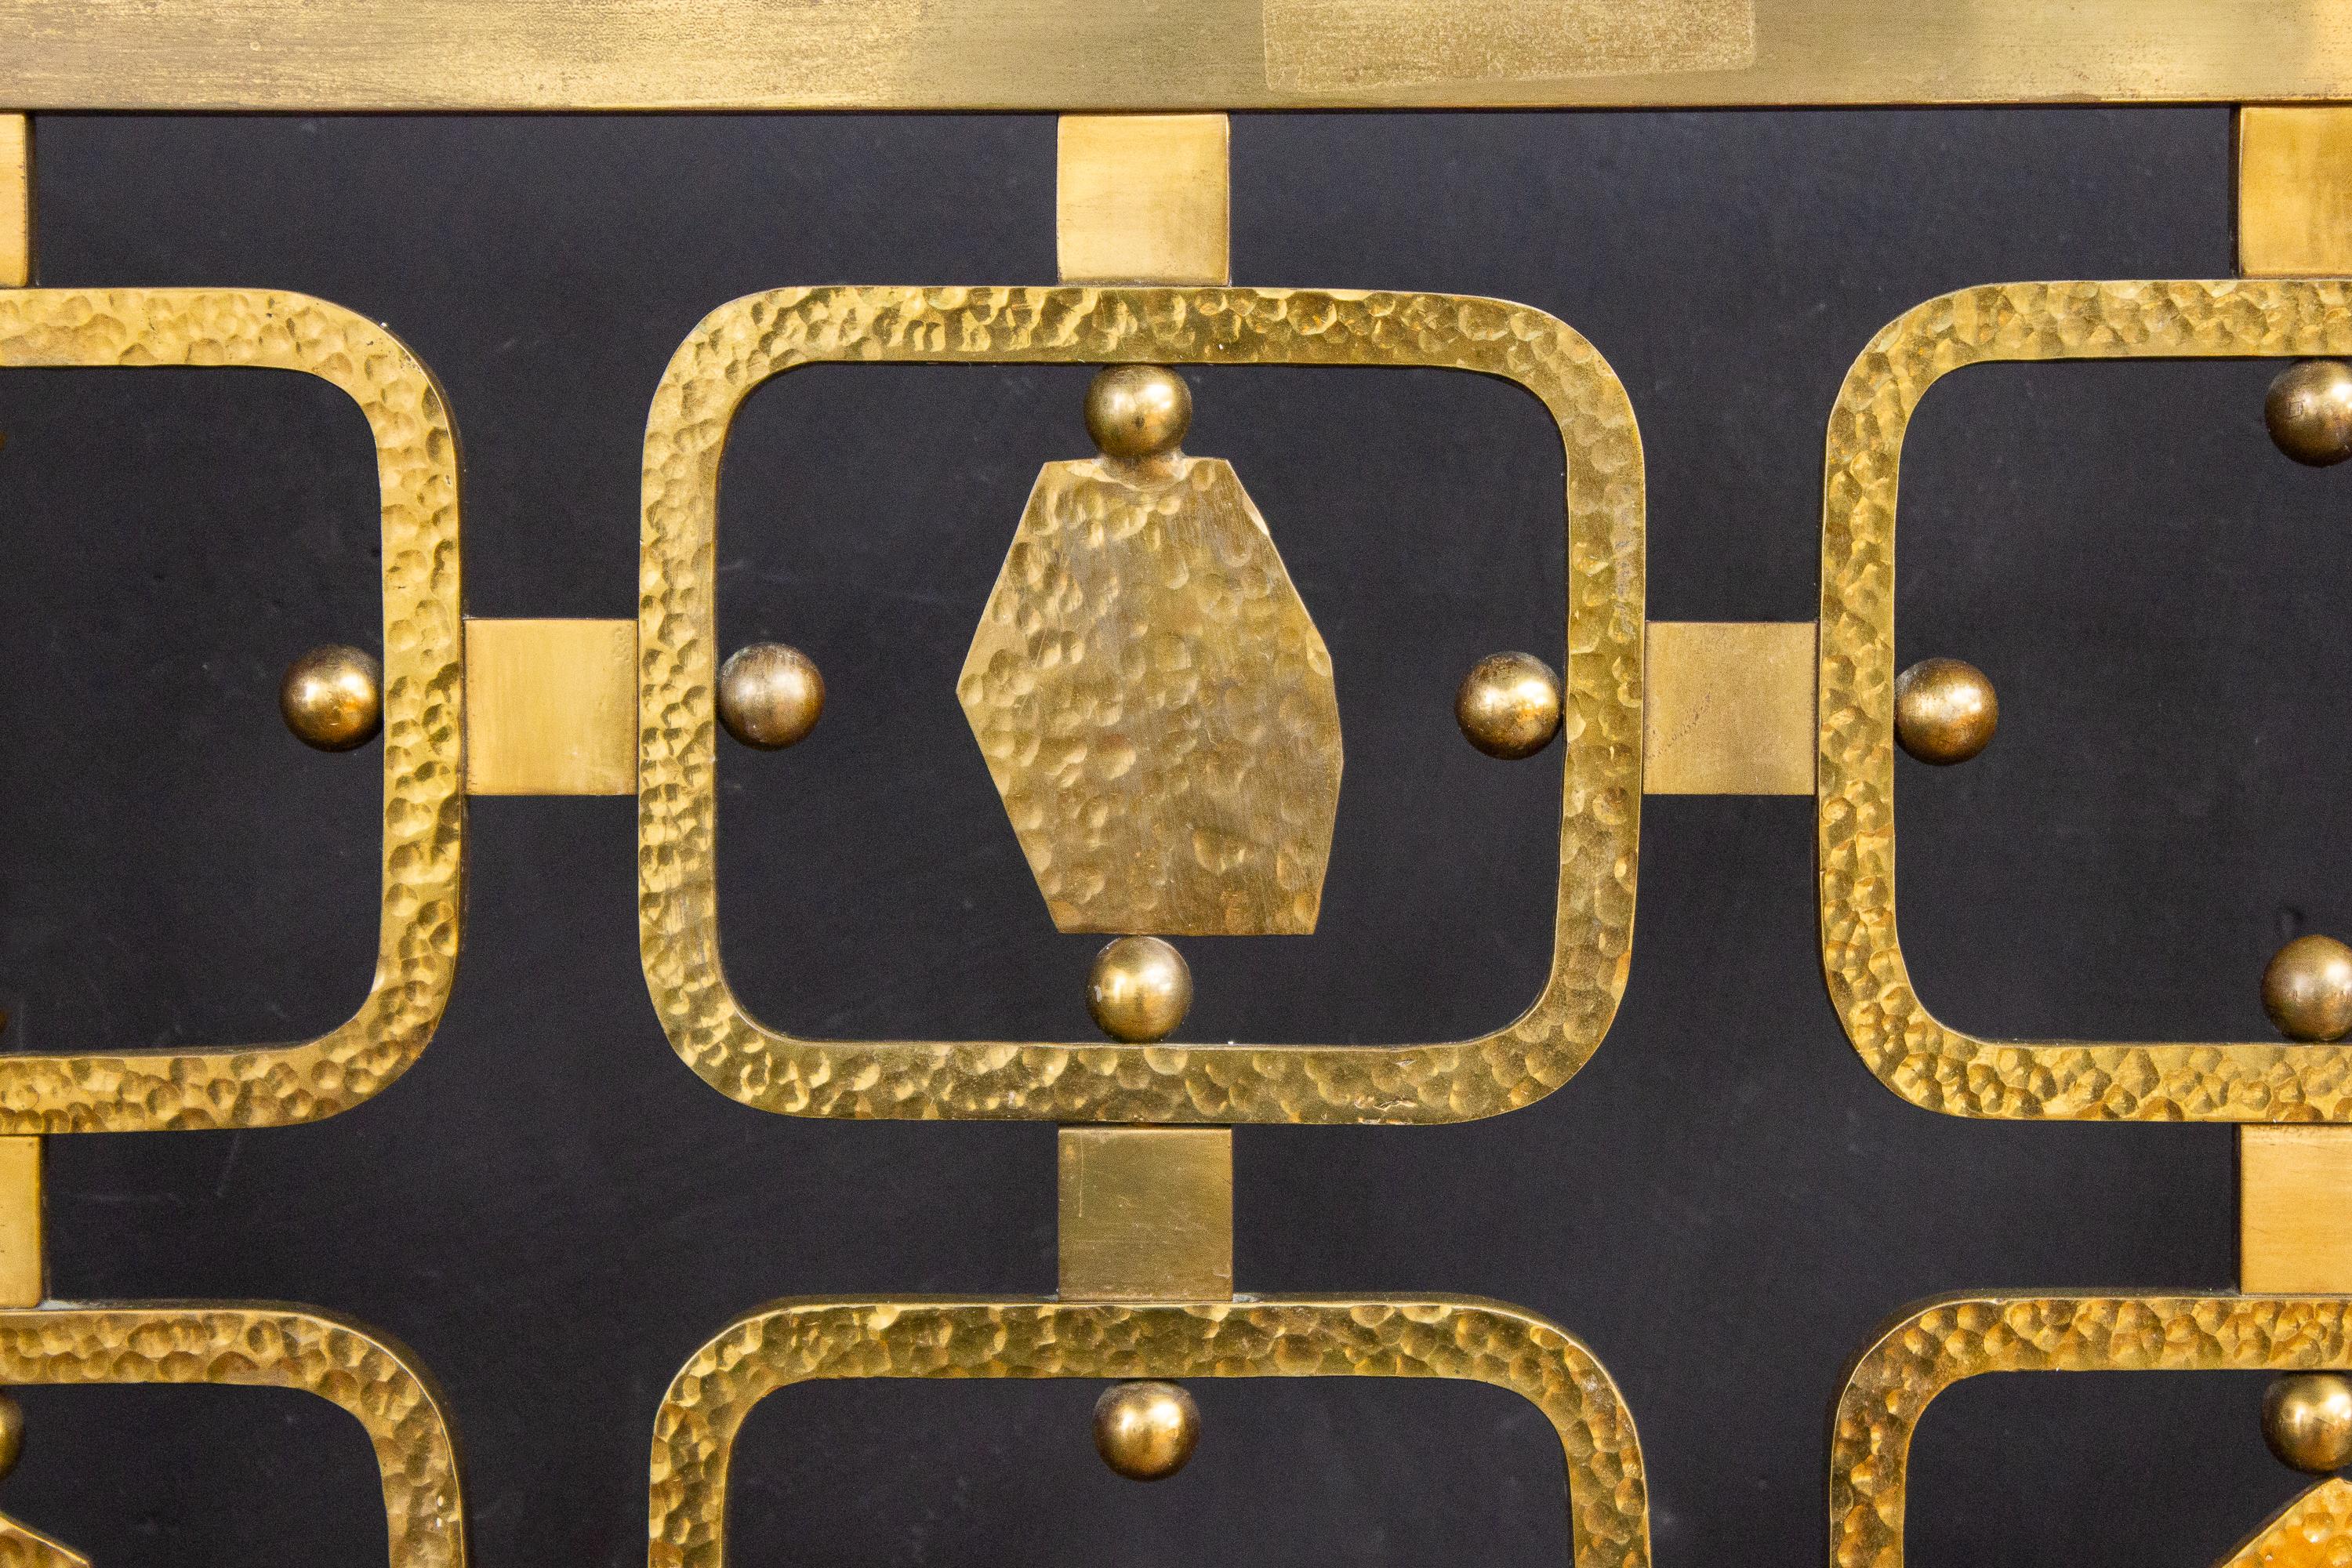 A rare pair of important brass bed frame from the Italian designer, Osvaldo Borsani and sculptor, Arnaldo Pomodoro.
Produced circa 1958, the principal structure of the bed, designed by Borsani is made from solid hammered brass and painted steel